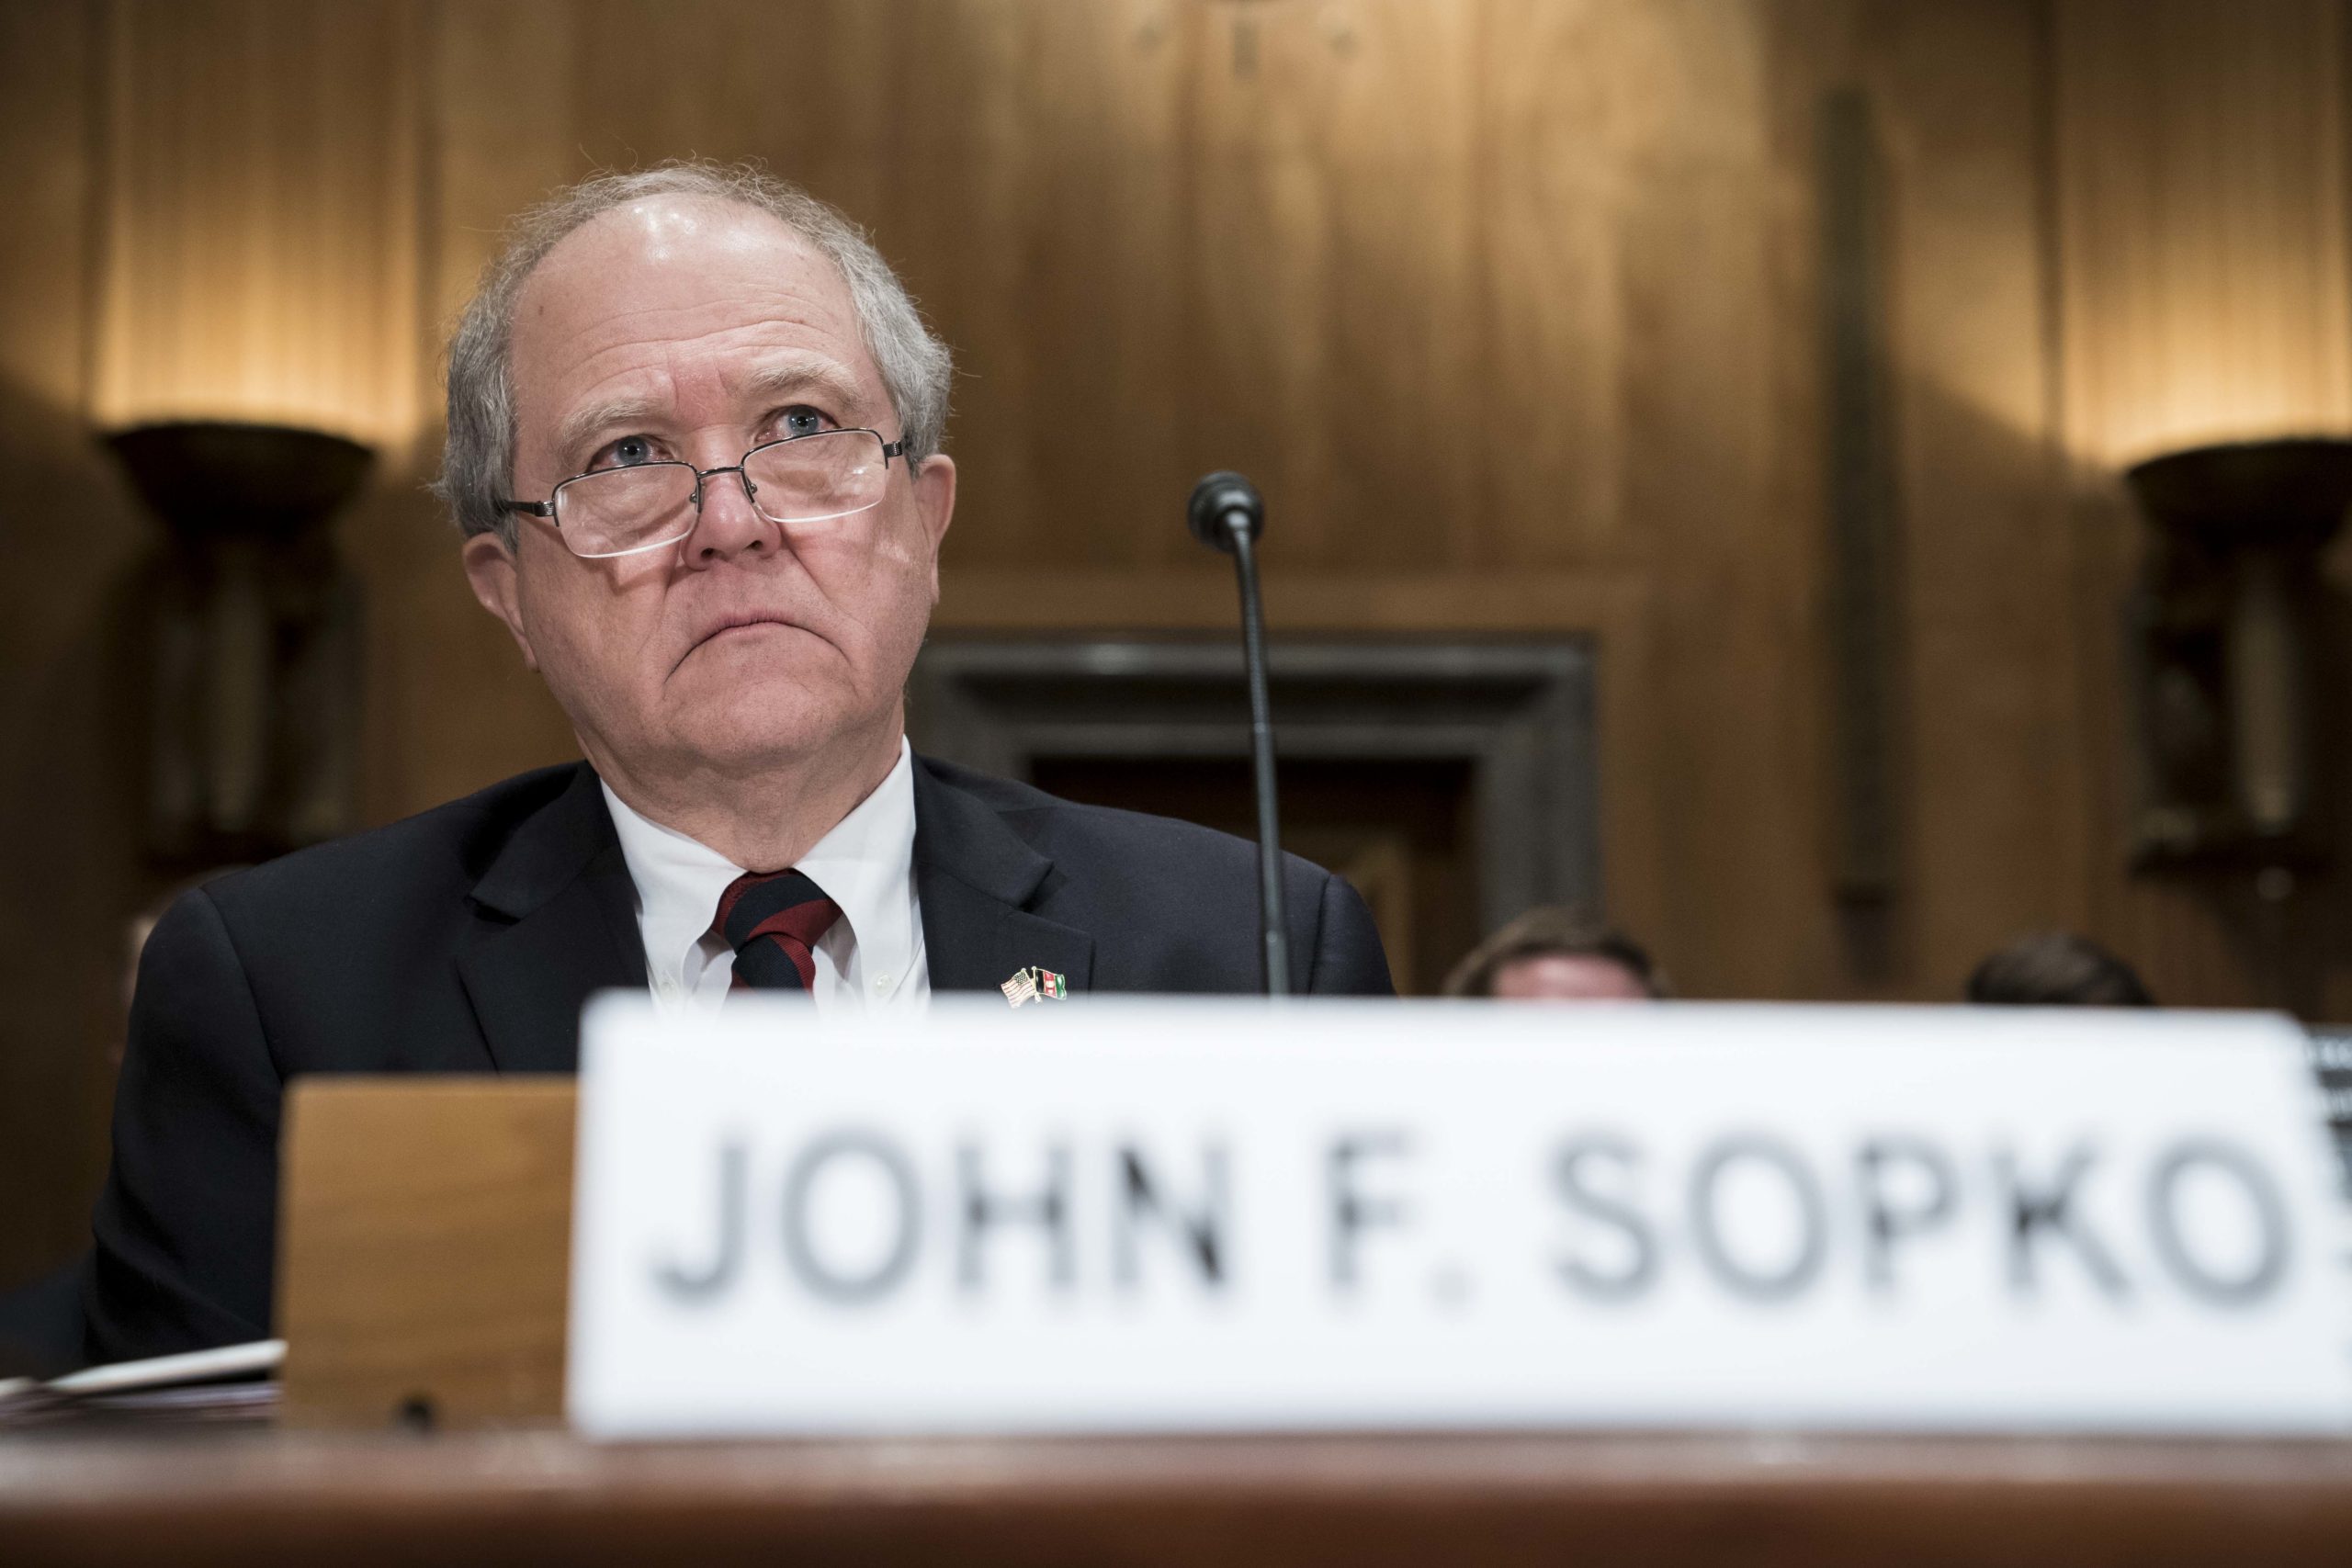 WASHINGTON, DC - FEBRUARY 11: John F. Sopko, special inspector general for Afghanistan reconstruction, testifies before the Senate Homeland Security and Governmental Affairs Committee in the Dirksen Senate Office Building on February 11, 2020 in Washington, DC. The Senate committee heard testimony on the costs and benefits of the war in Afghanistan which is America's longest war.